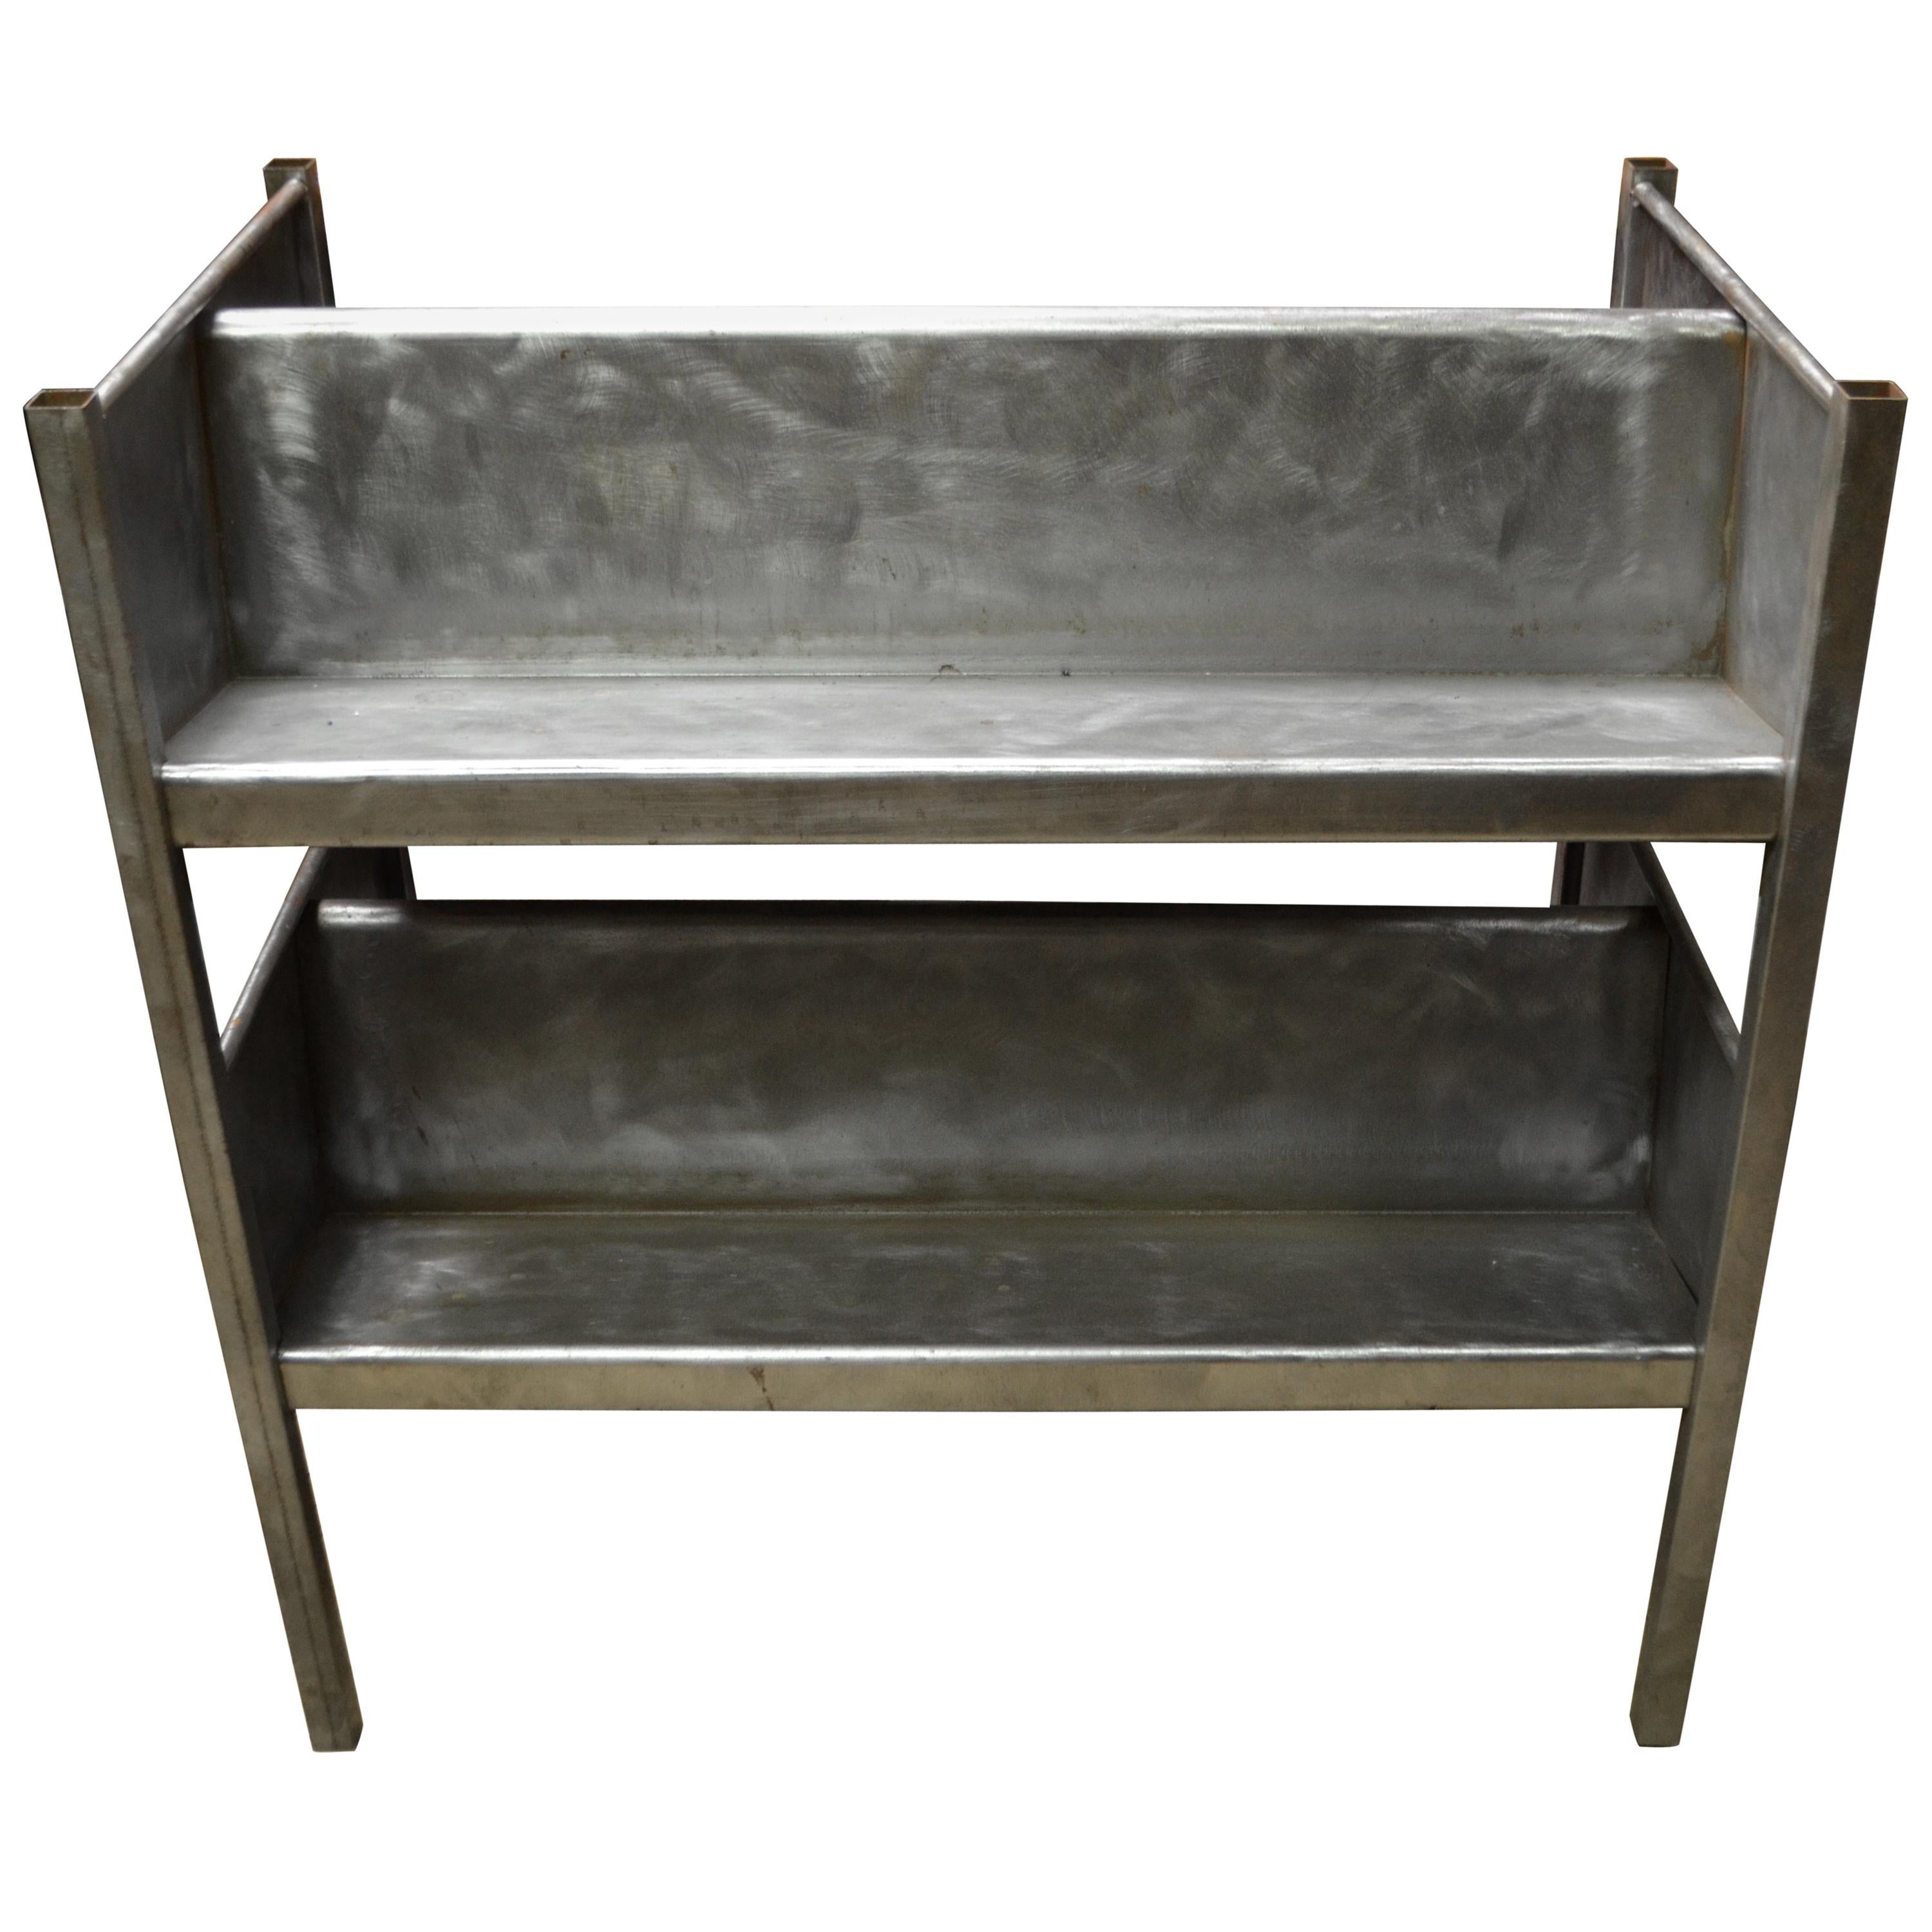 Industrial Cart of Steel with Storage Shelves